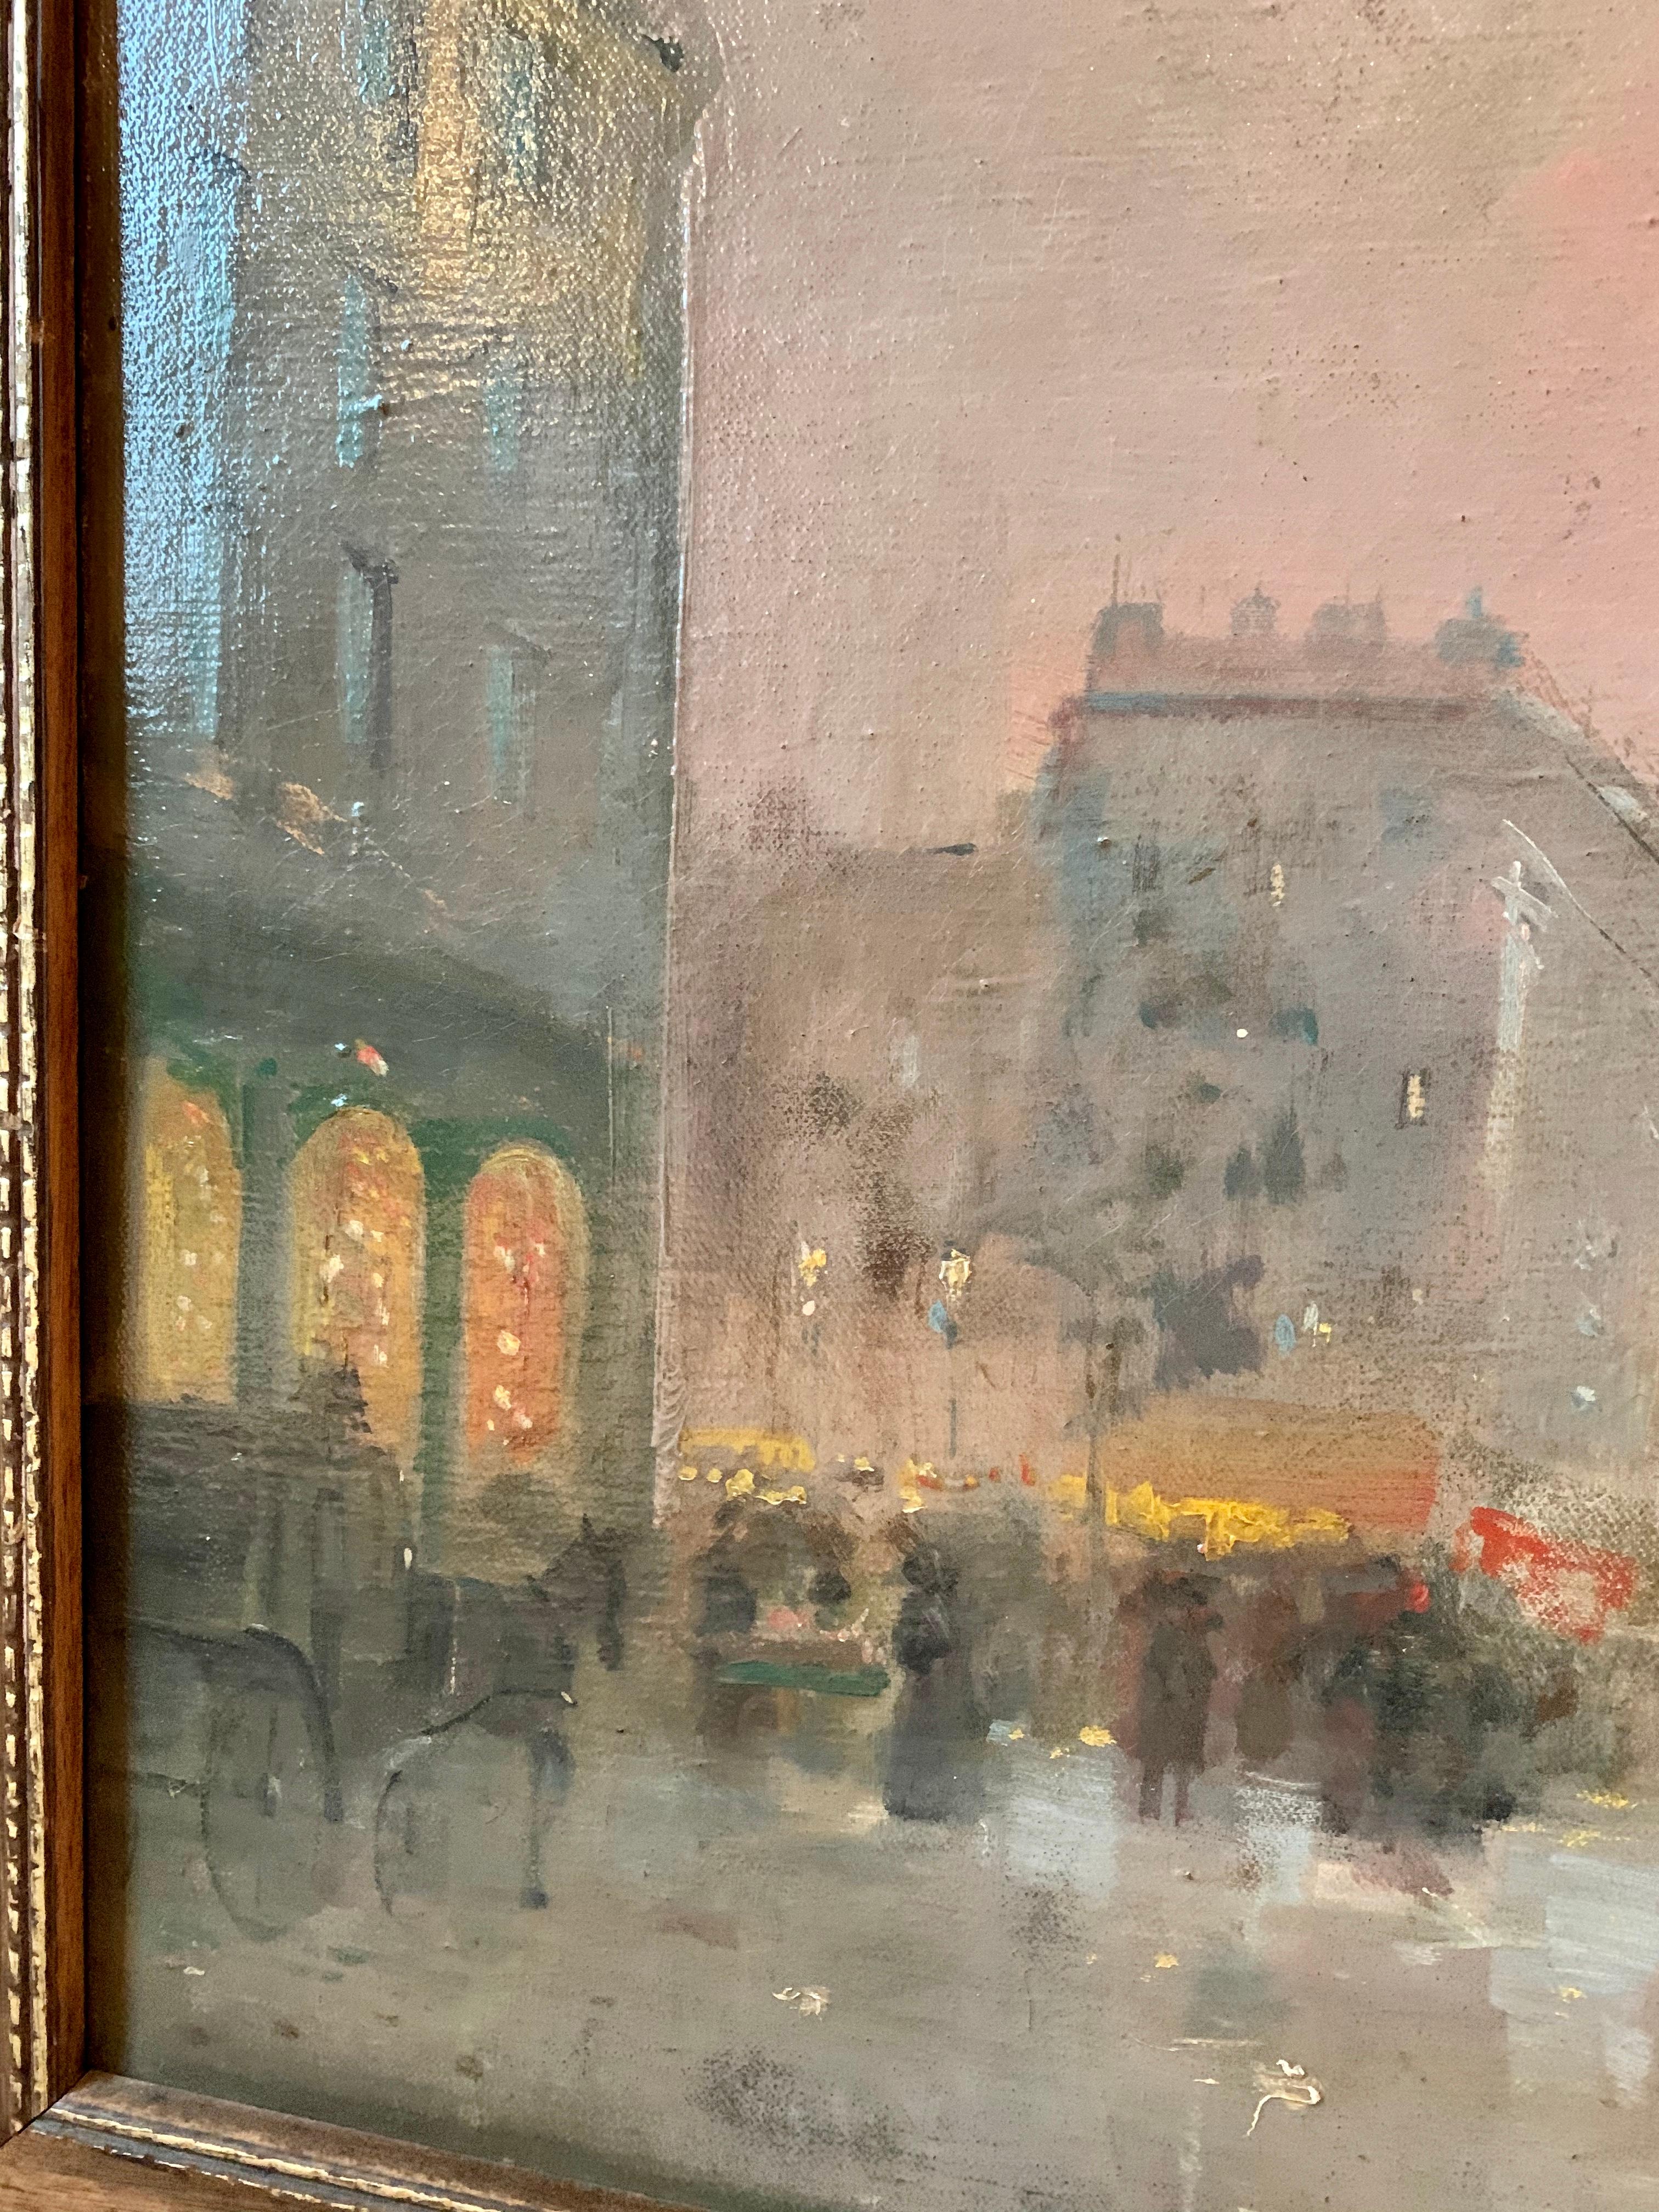 19th century French impressionistic Parisian cityscape - Impressionist Painting by Emile Gérard